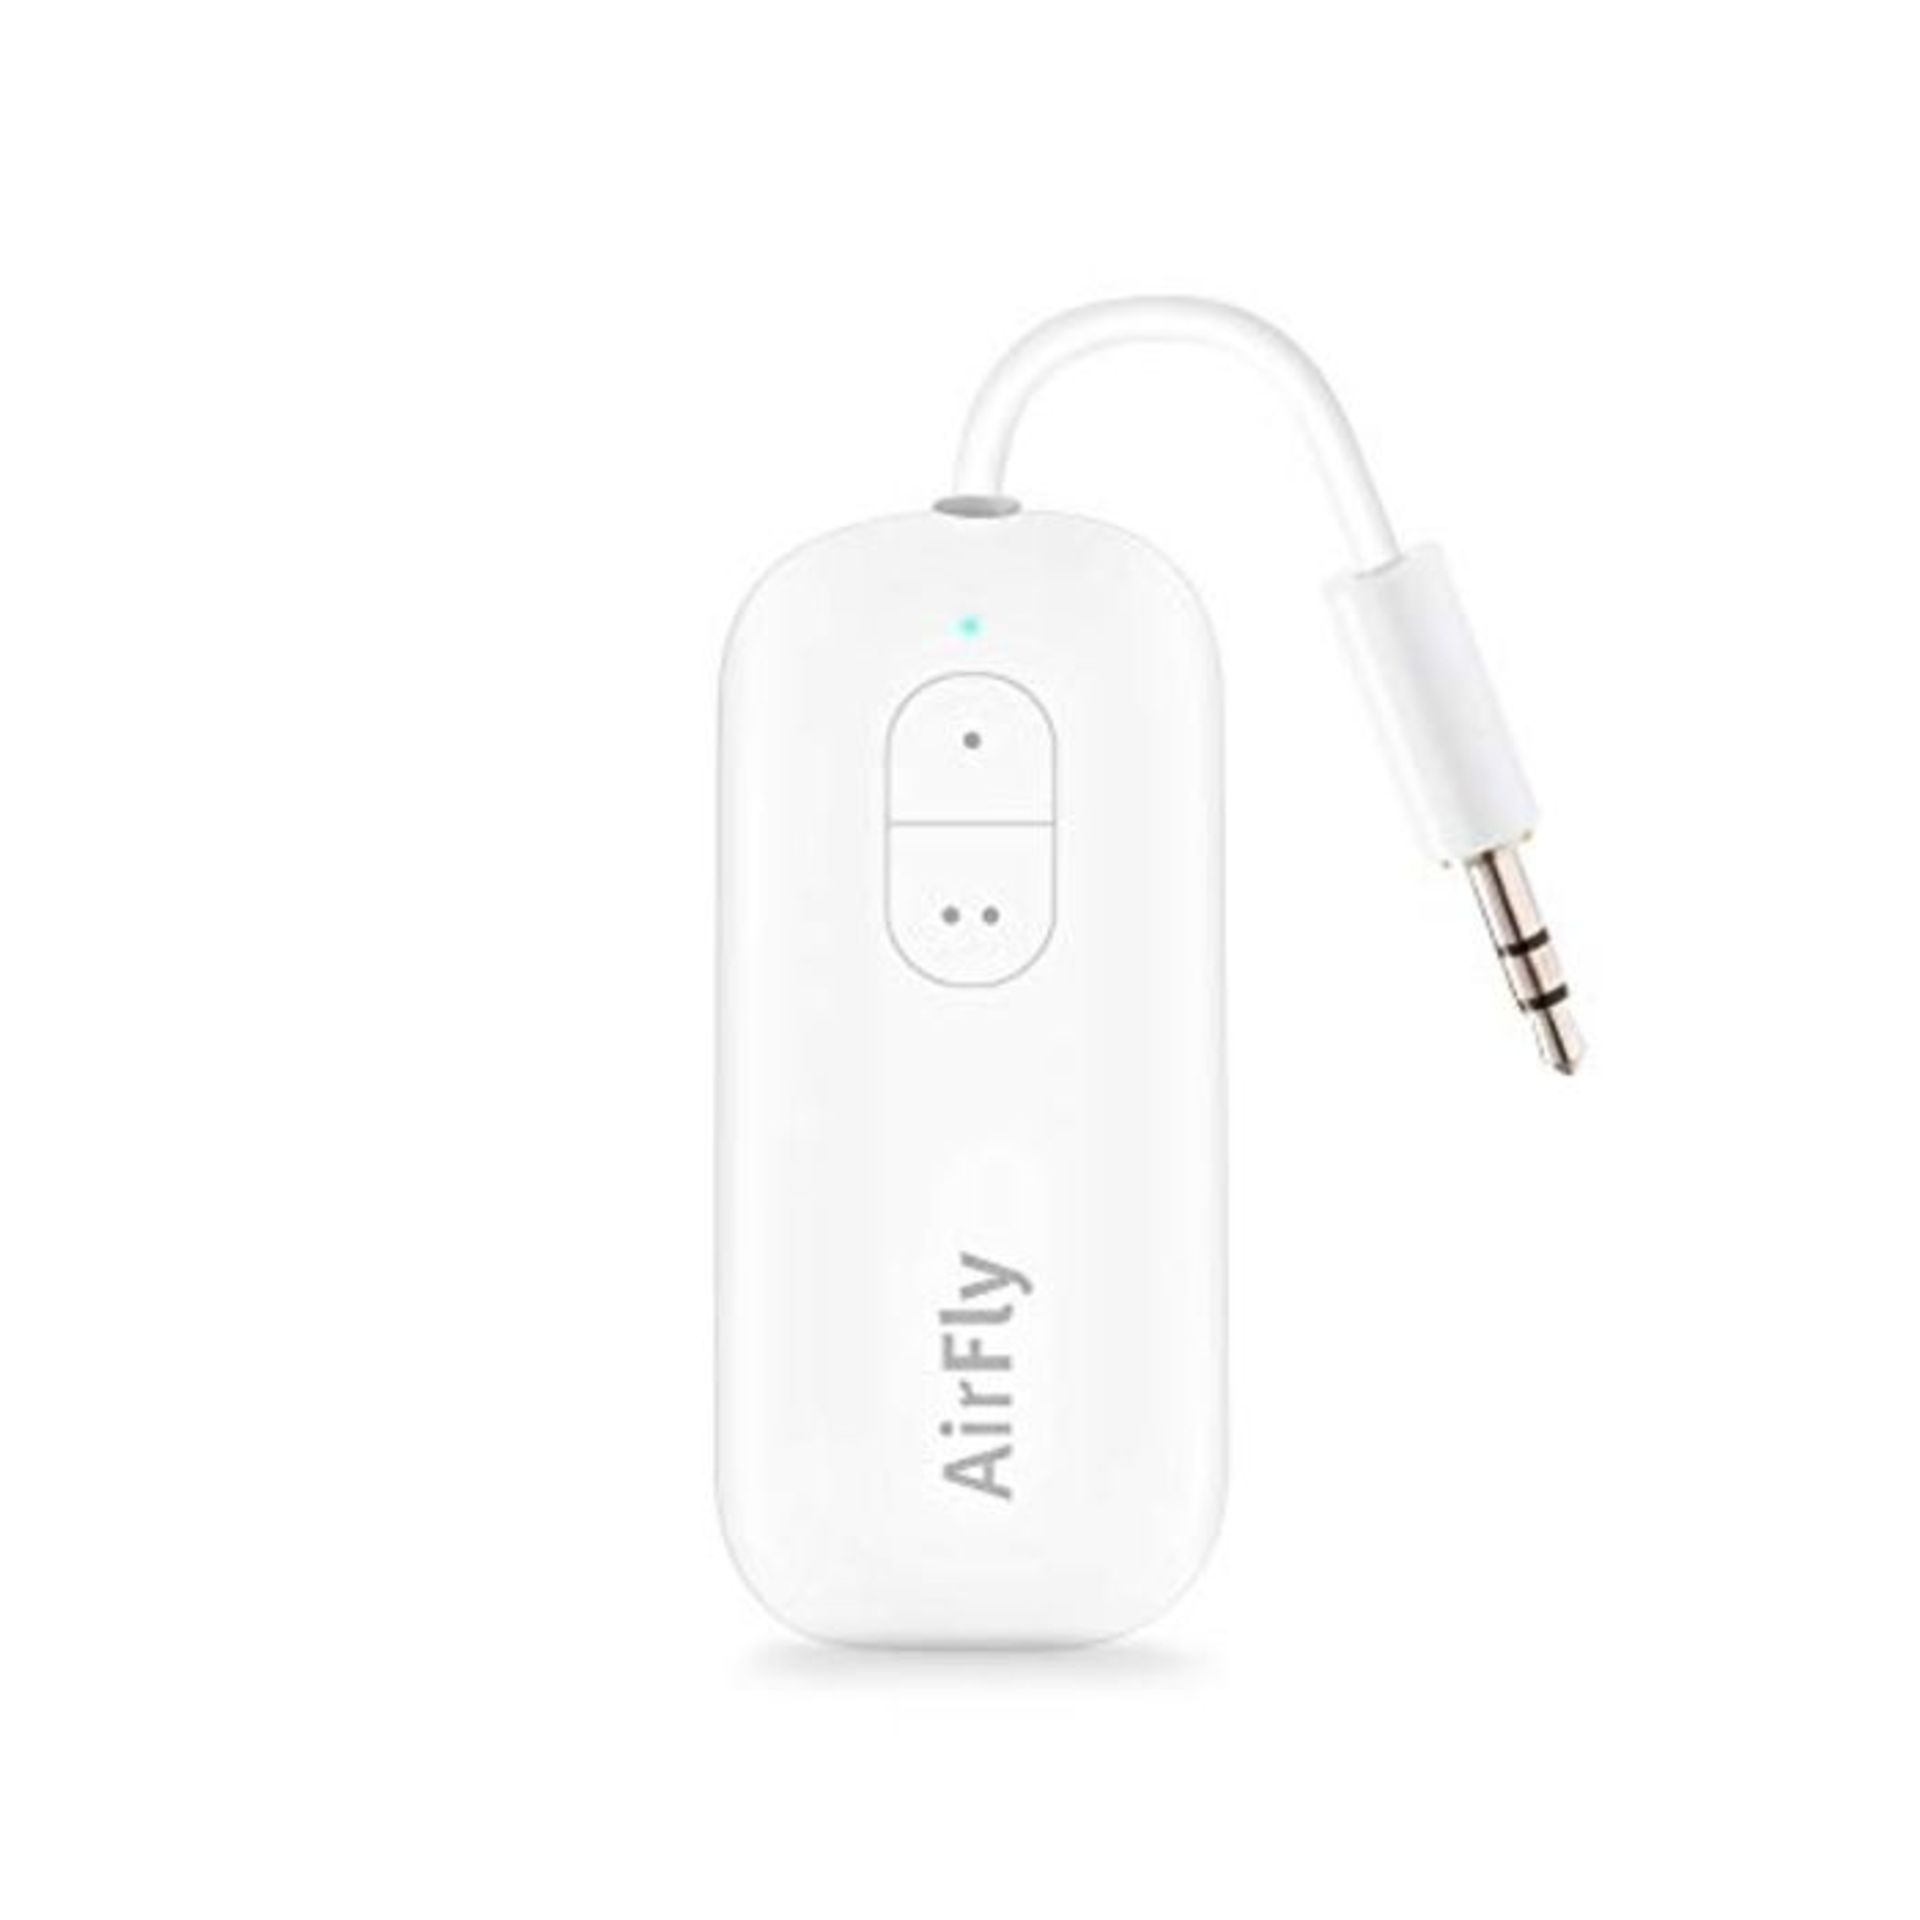 Twelve South AirFly Duo | Wireless Transmitter with Audio Sharing for Up to 2 AirPods/